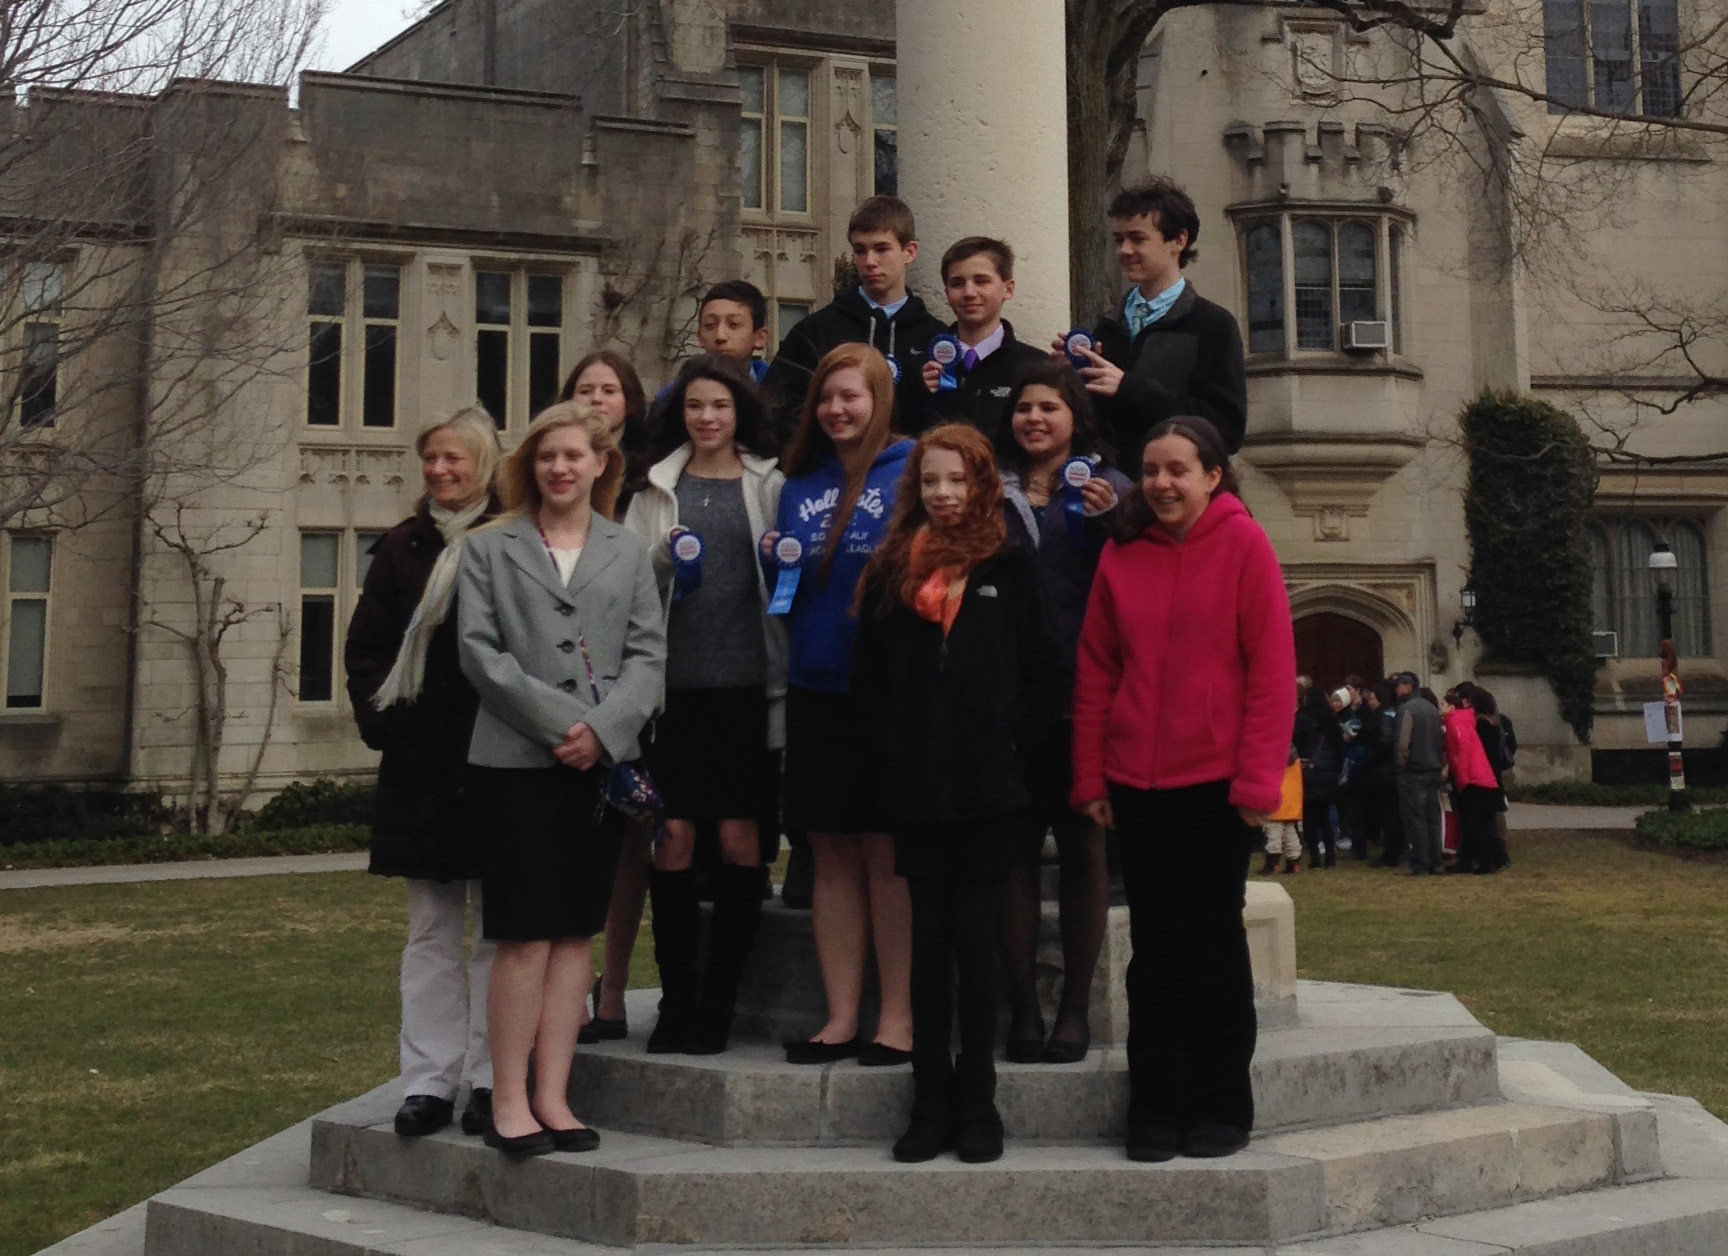 Emma Anmolsingh (pink jacket, far right) poses with her classmates after regionals at Princeton University.